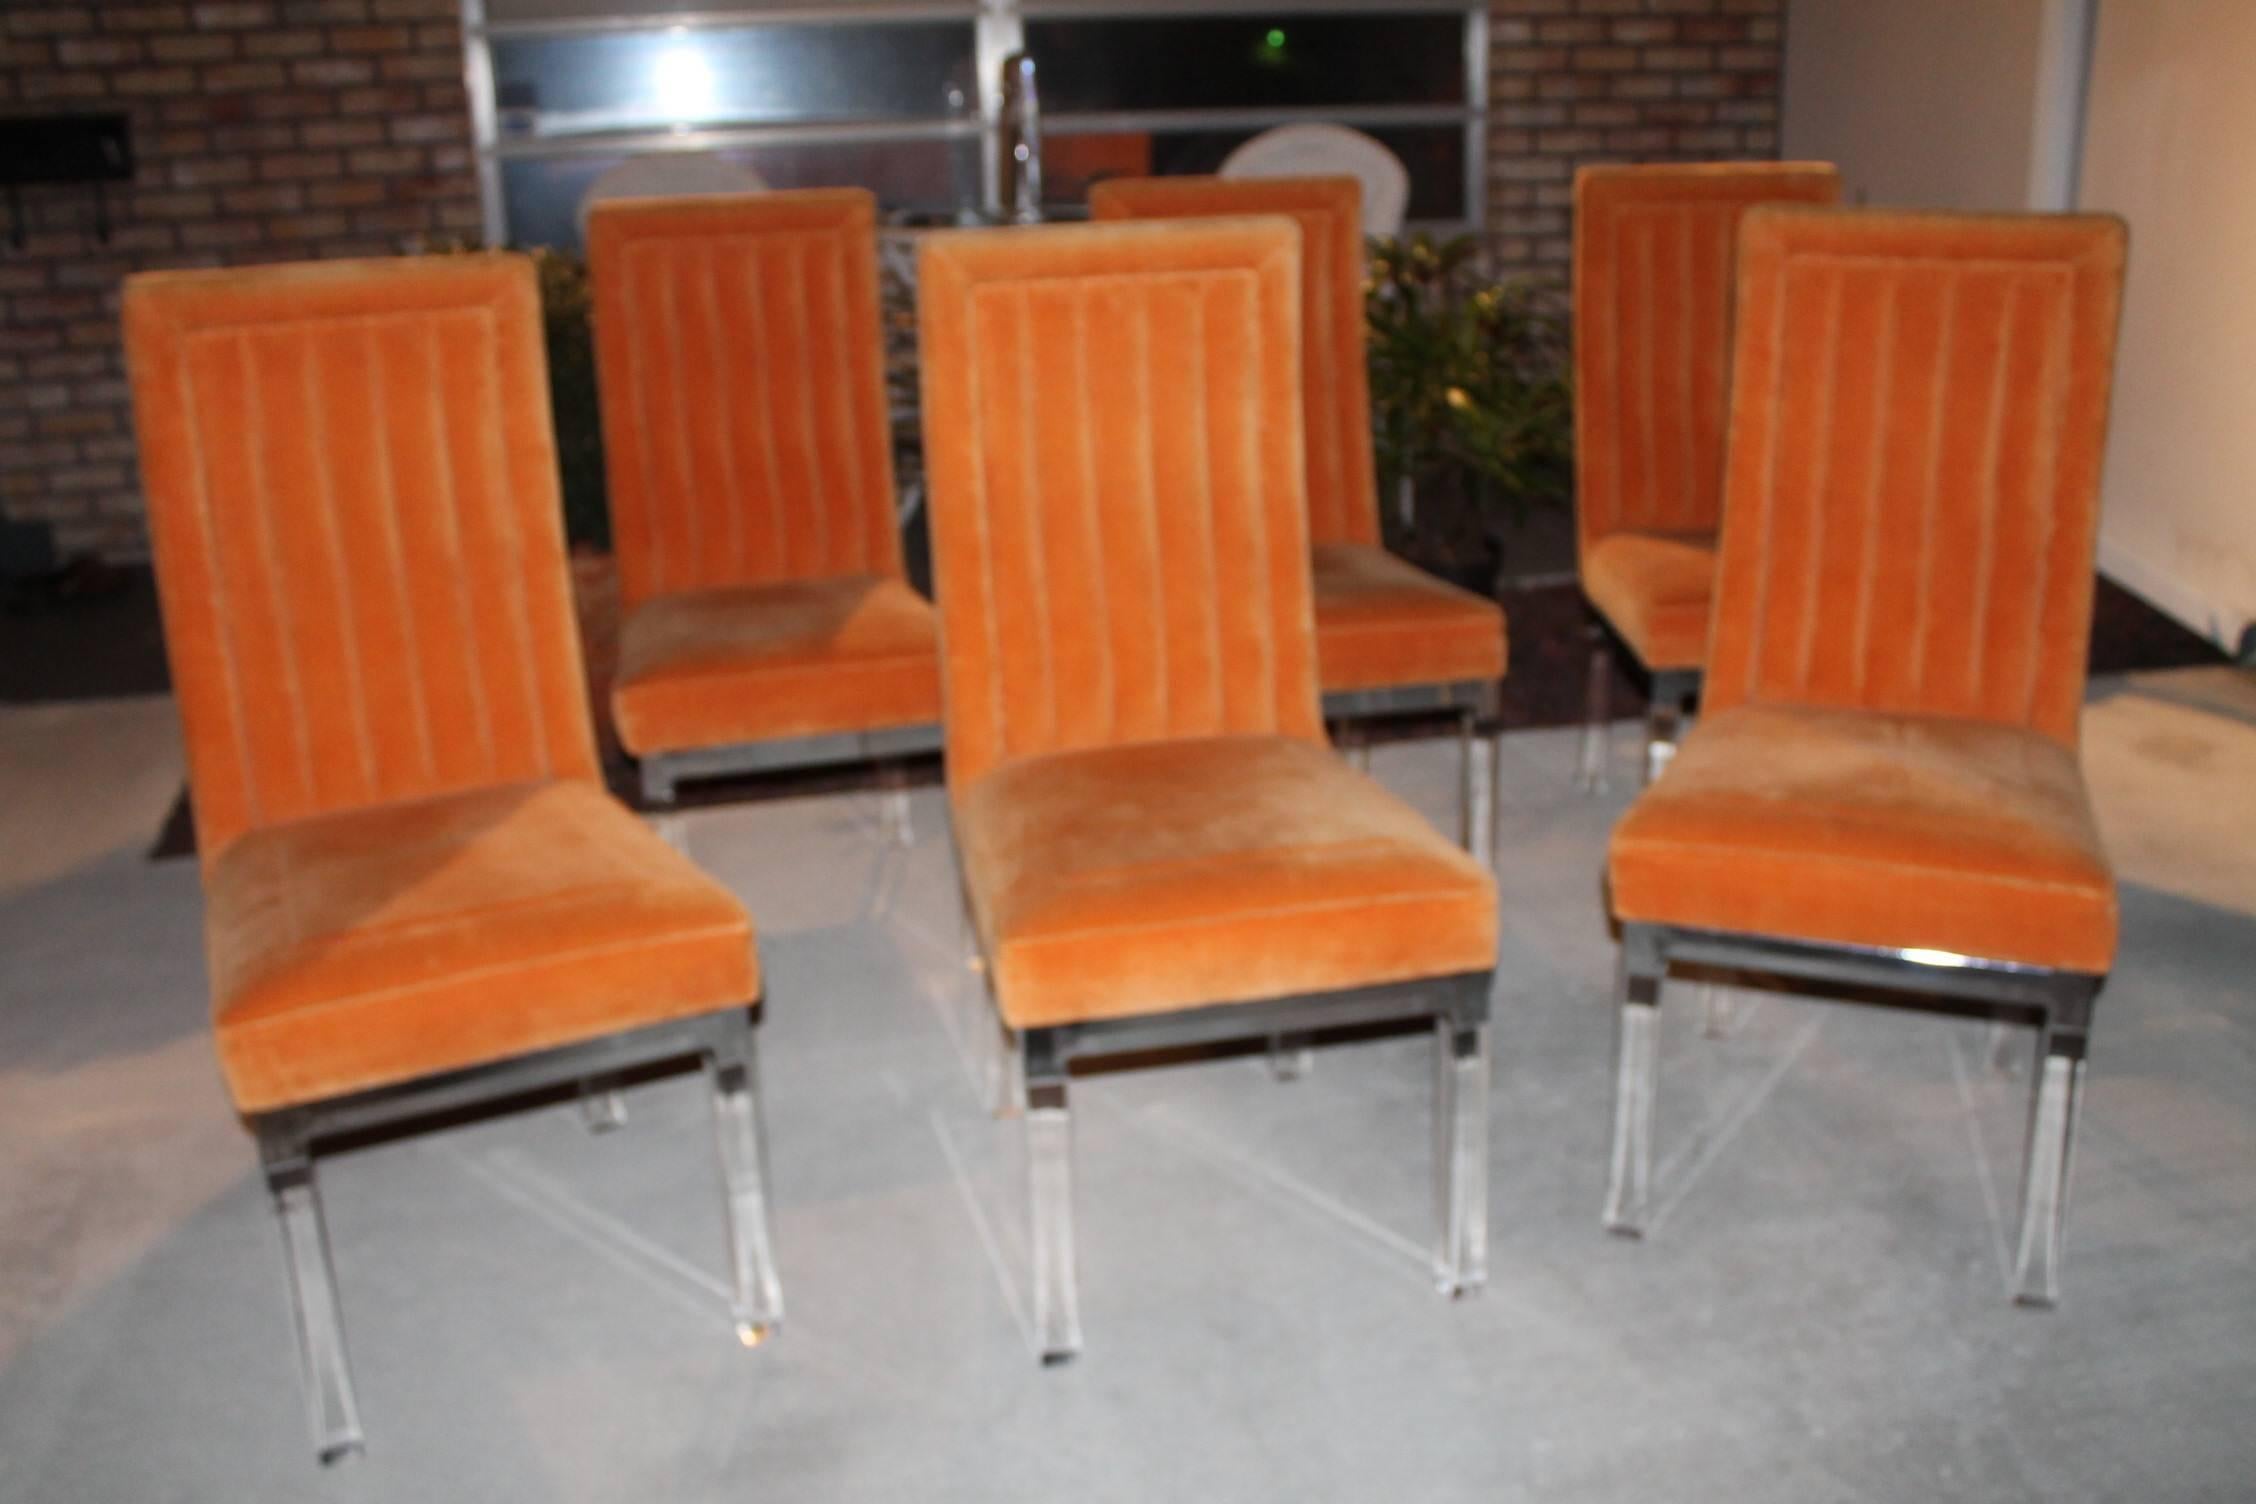 Set of six Vintage Hollywood Palm Beach Regency Charles Hollis Jones by Hill Mfg Lucite and chrome dining chairs. Original channel back orange upholstery will need new upholstery. I have more of these chairs if you need a larger set let me know. I